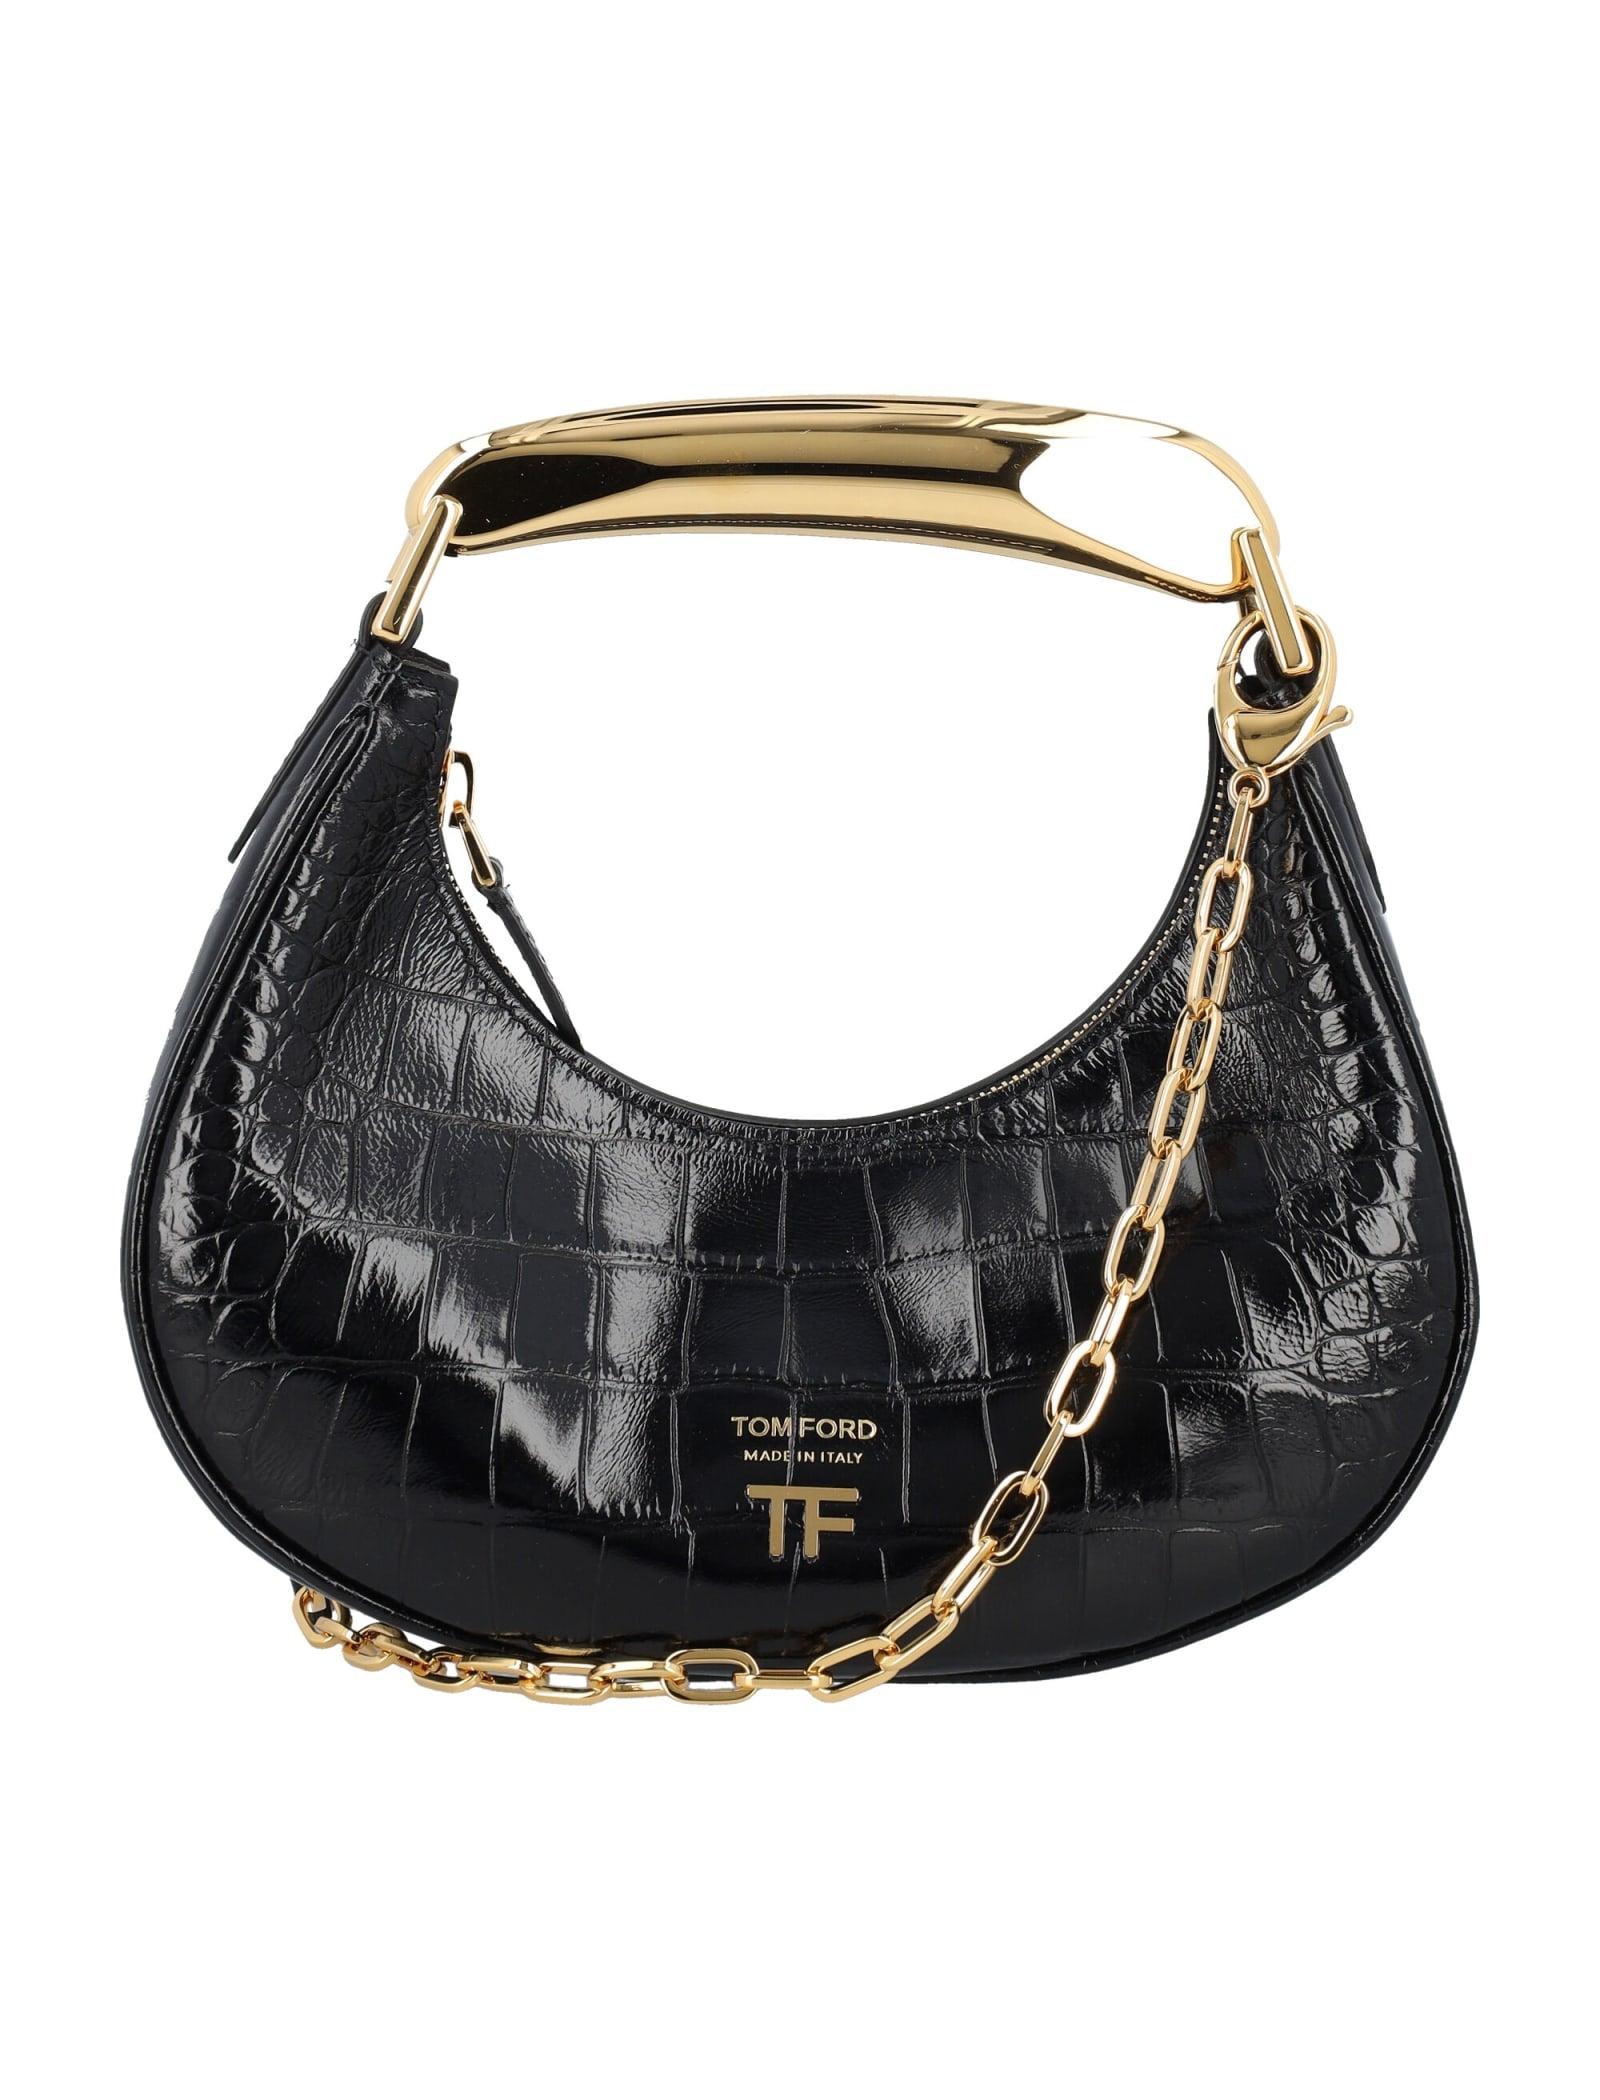 Black Logo-stamped crocodile-effect leather pouch, Tom Ford